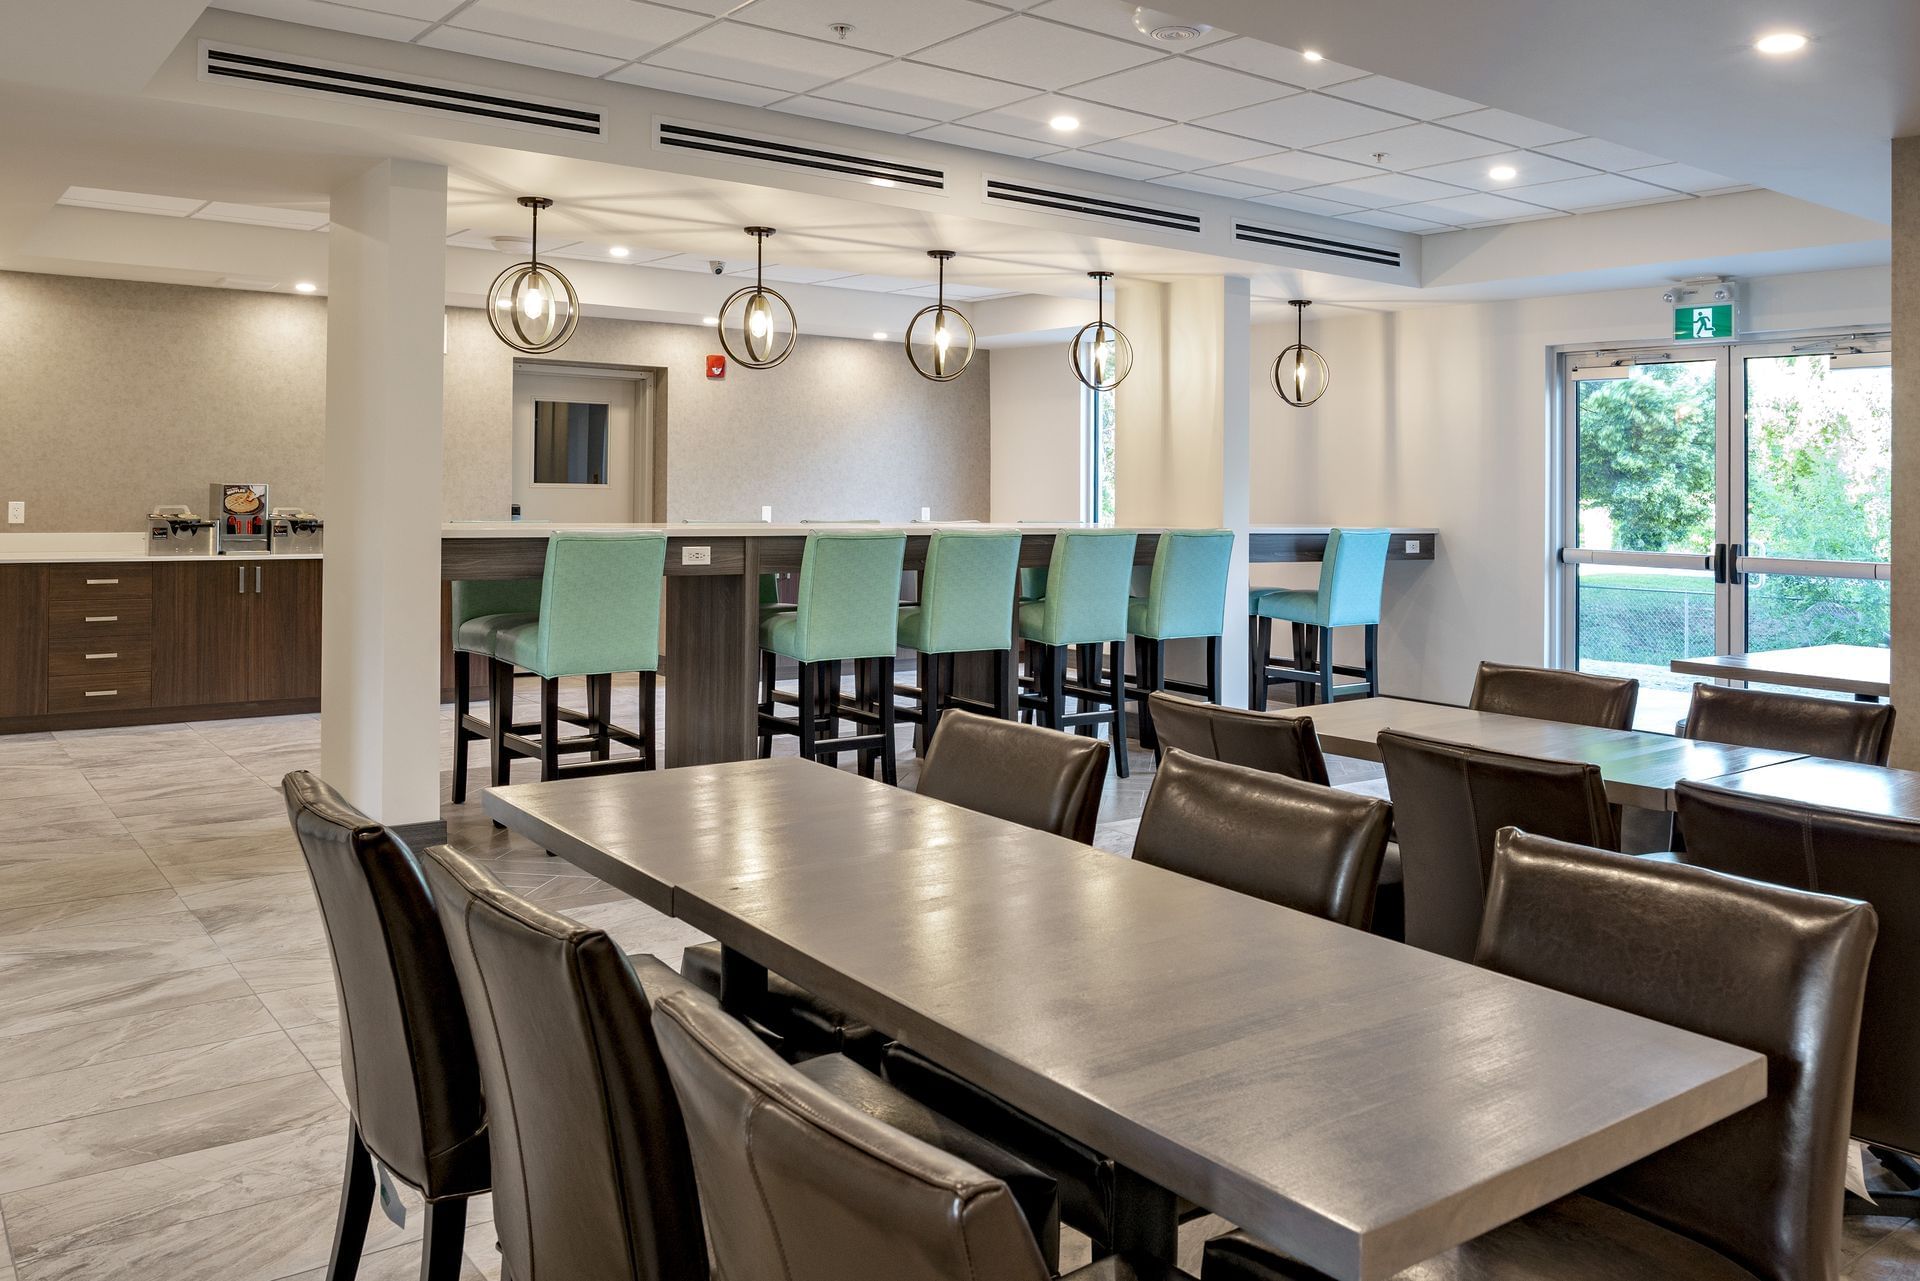 Dining tables at continental breakfast